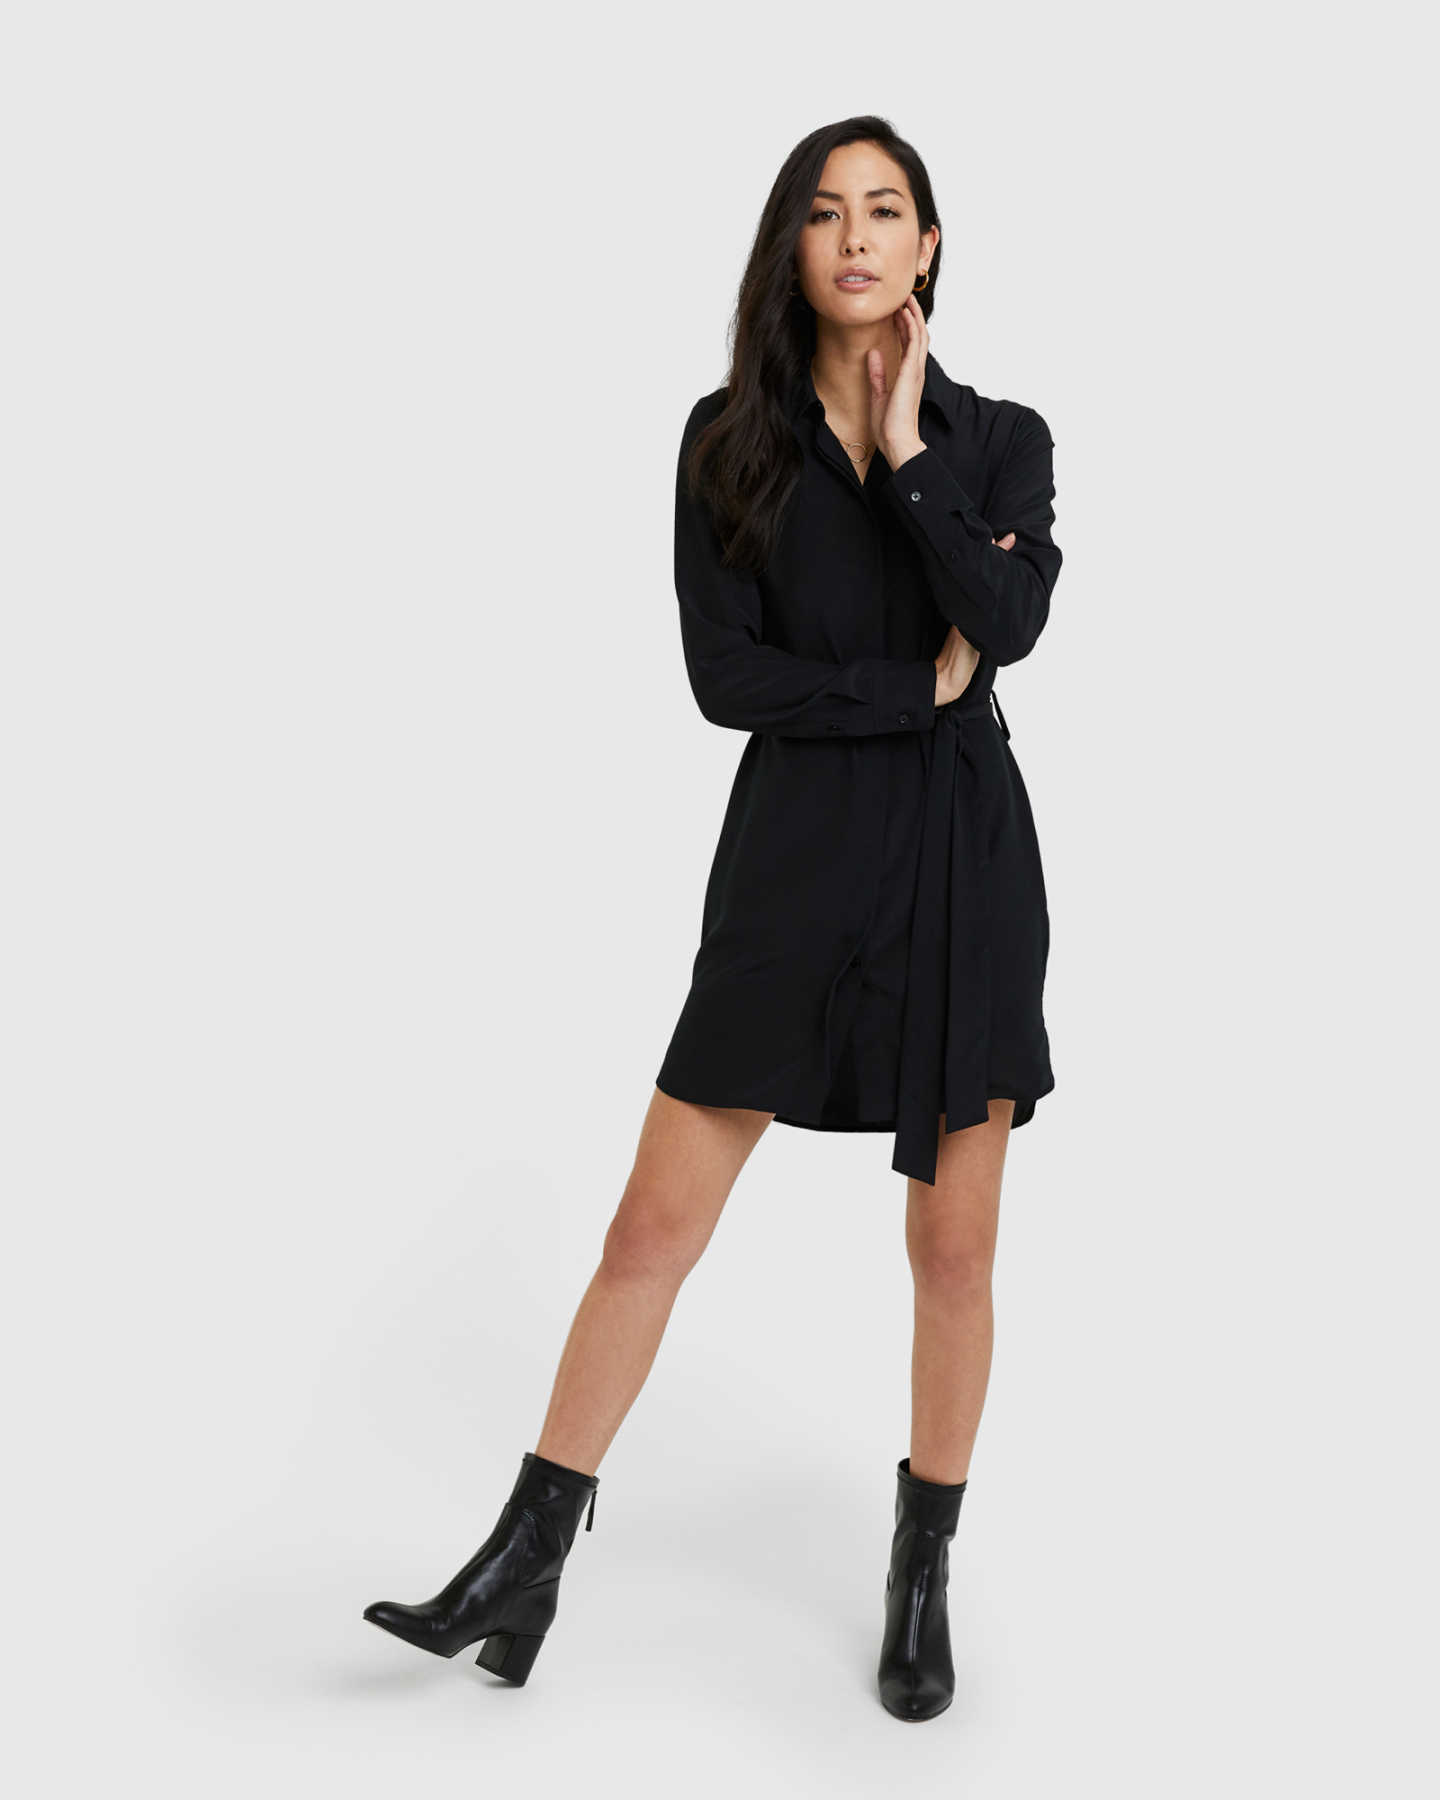 You May Also Like - Washable Stretch Silk Shirt Dress - Black